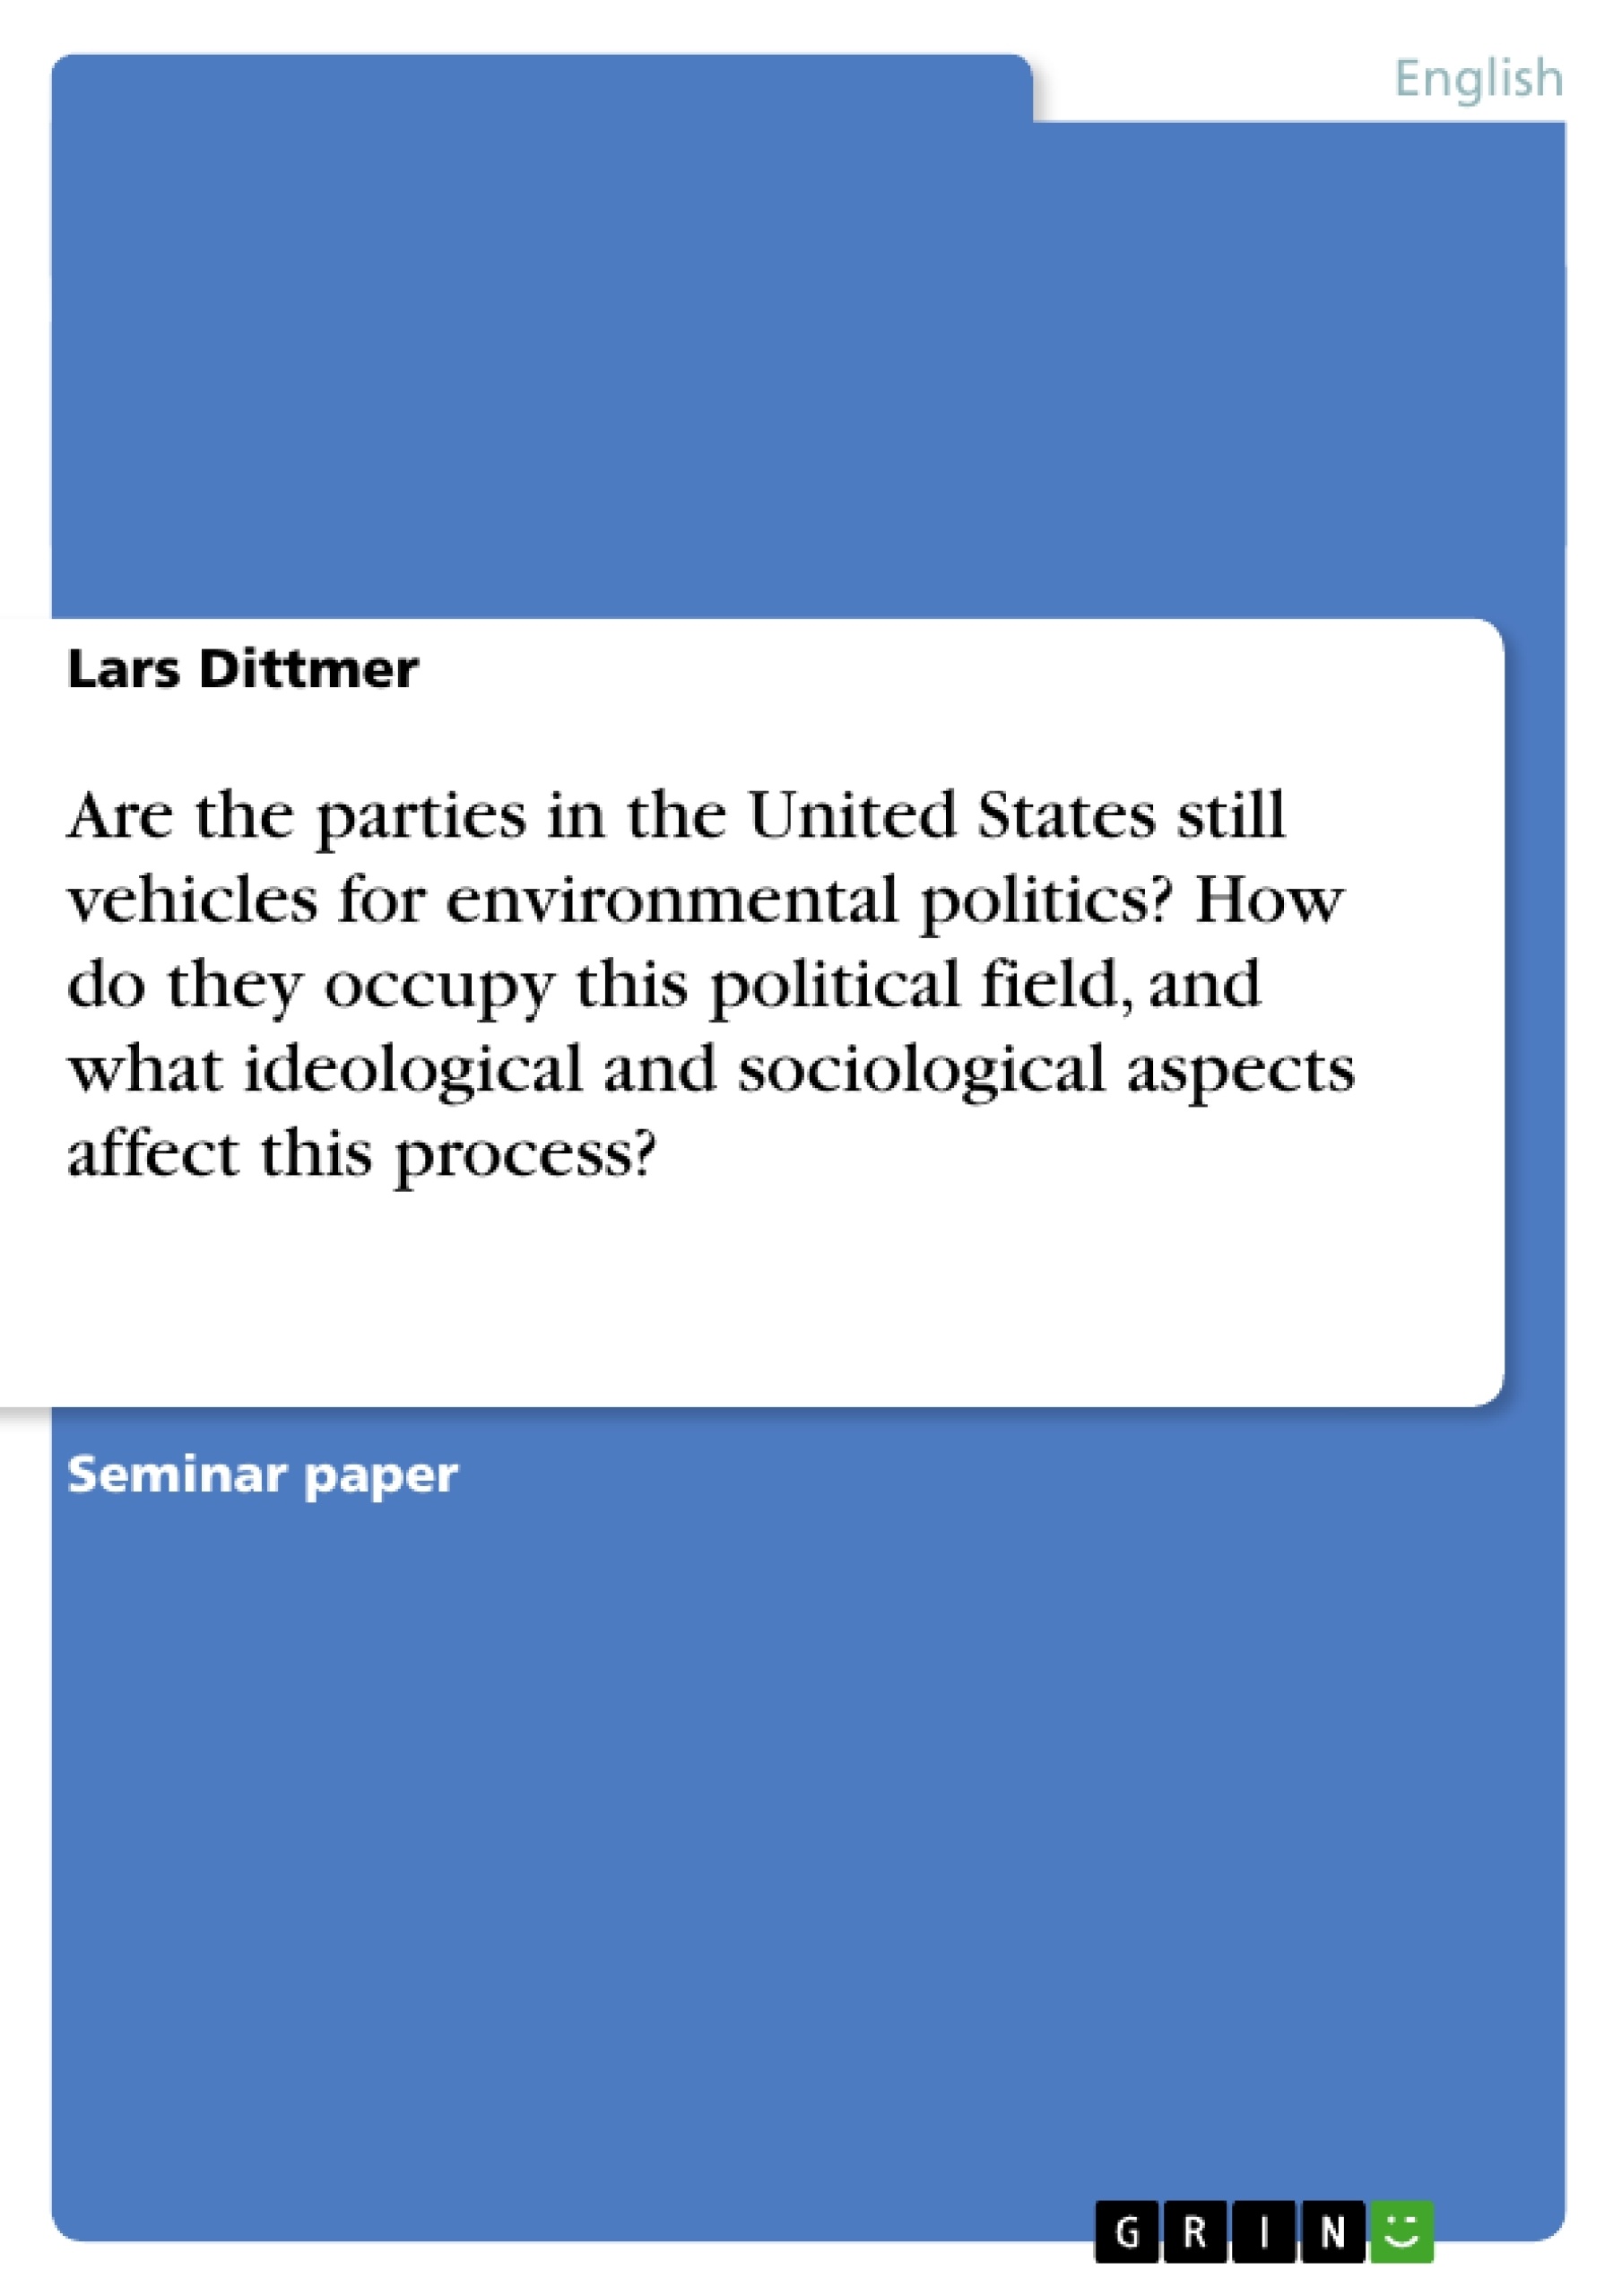 Titre: Are the parties in the United States still vehicles for environmental politics? How do they occupy this political field, and what ideological and sociological aspects affect this process?